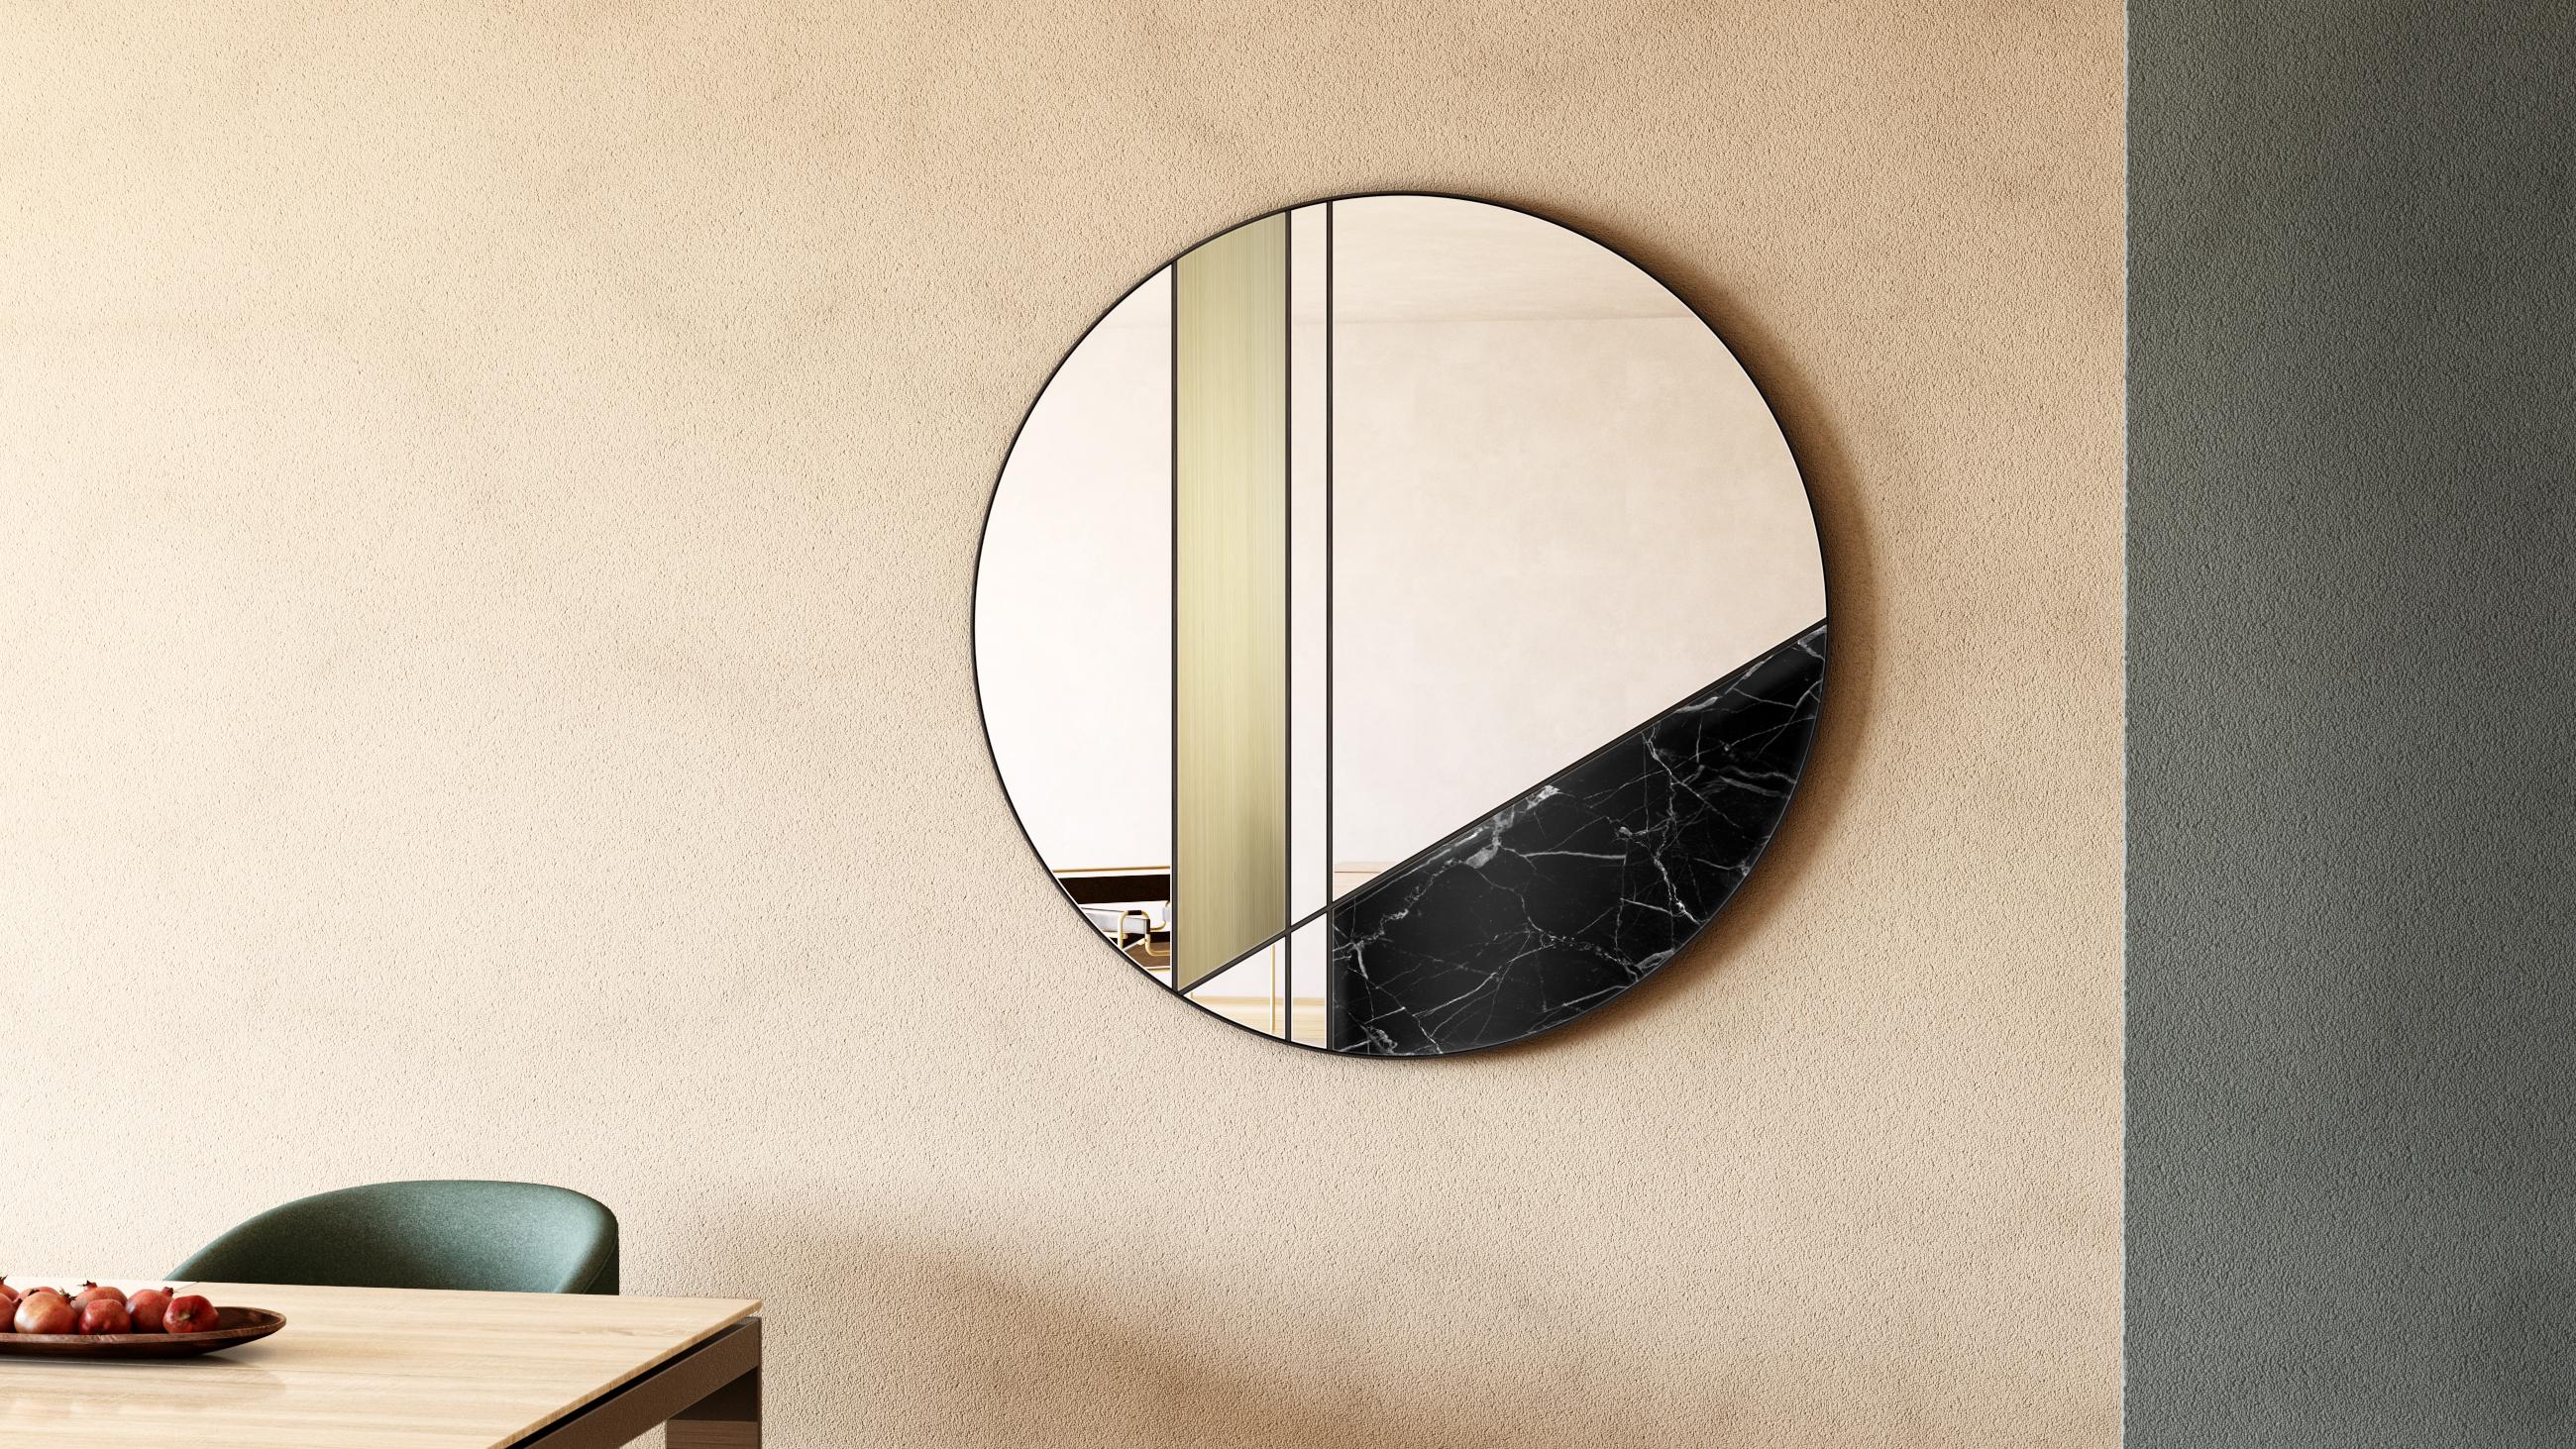 Lamina II

A refined play of slopes and inclined planes that intersect
and cut each other characterizes this mirror with a dynamic and futuristic design. The care in the realization and the research of the finest materials represent the